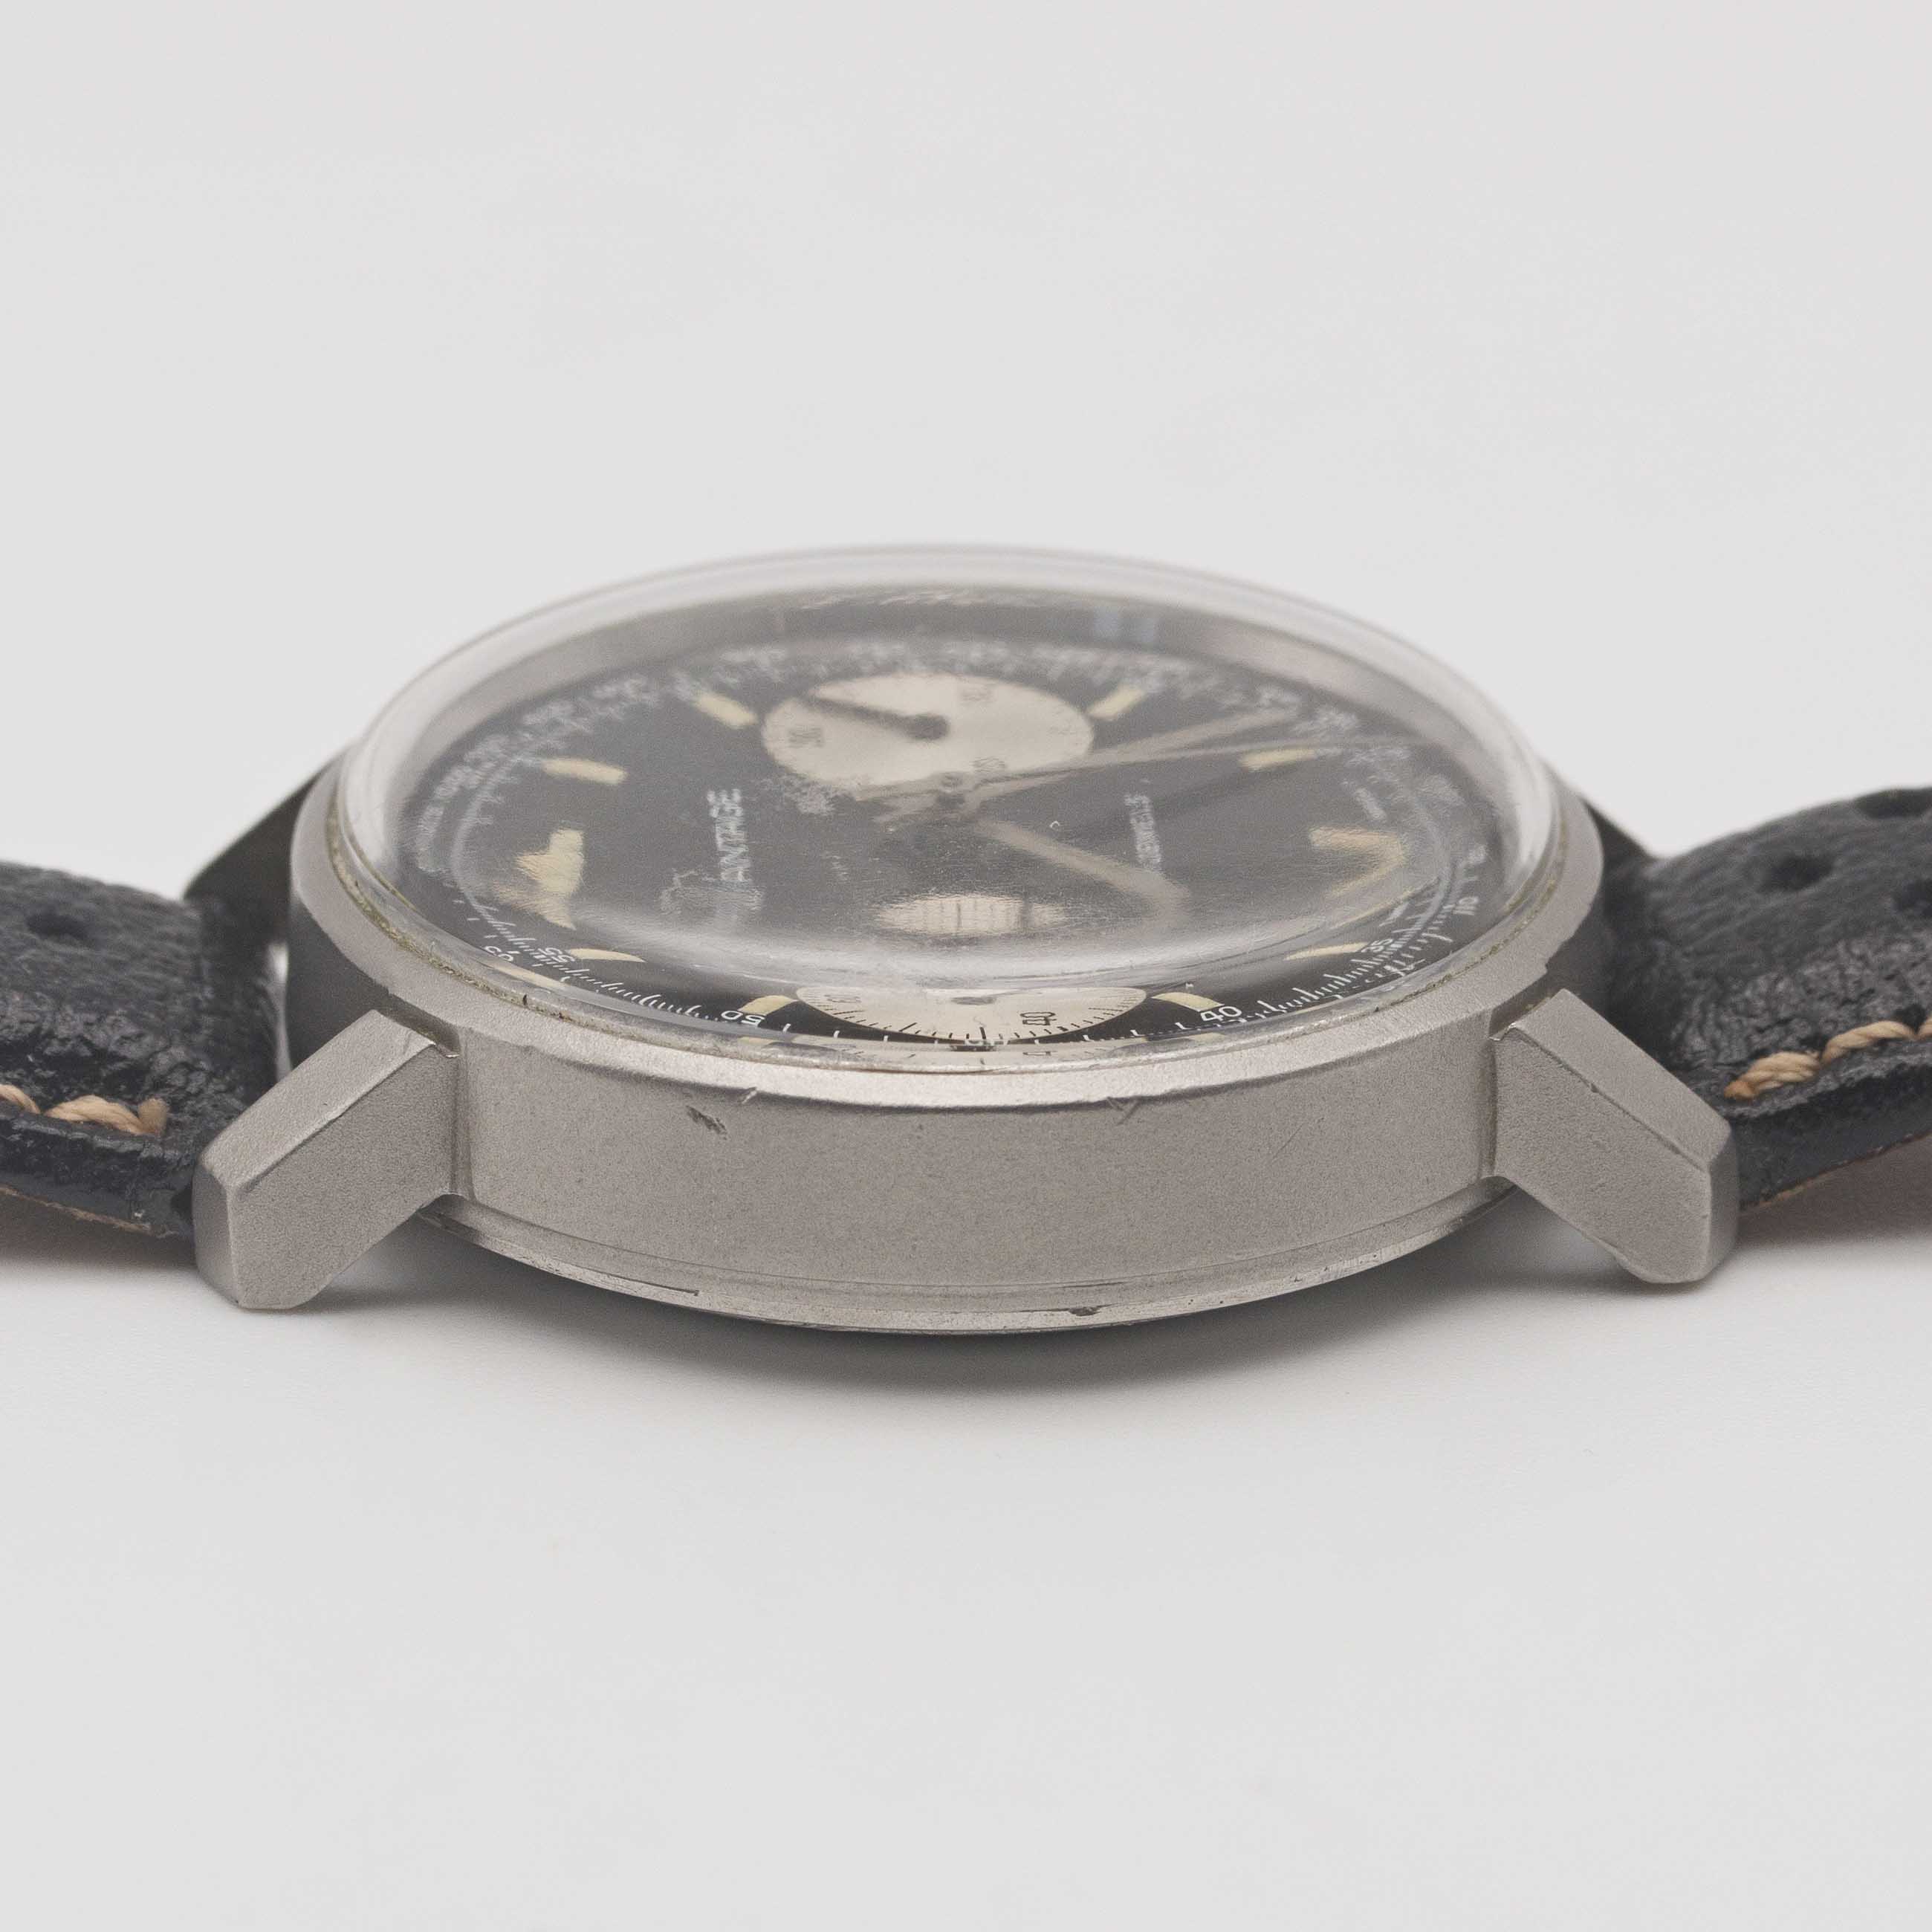 A GENTLEMAN'S STAINLESS STEEL VANTAGE CHRONOGRAPH WRIST WATCH CIRCA 1970, WITH GLOSS BLACK DIAL - Image 9 of 9